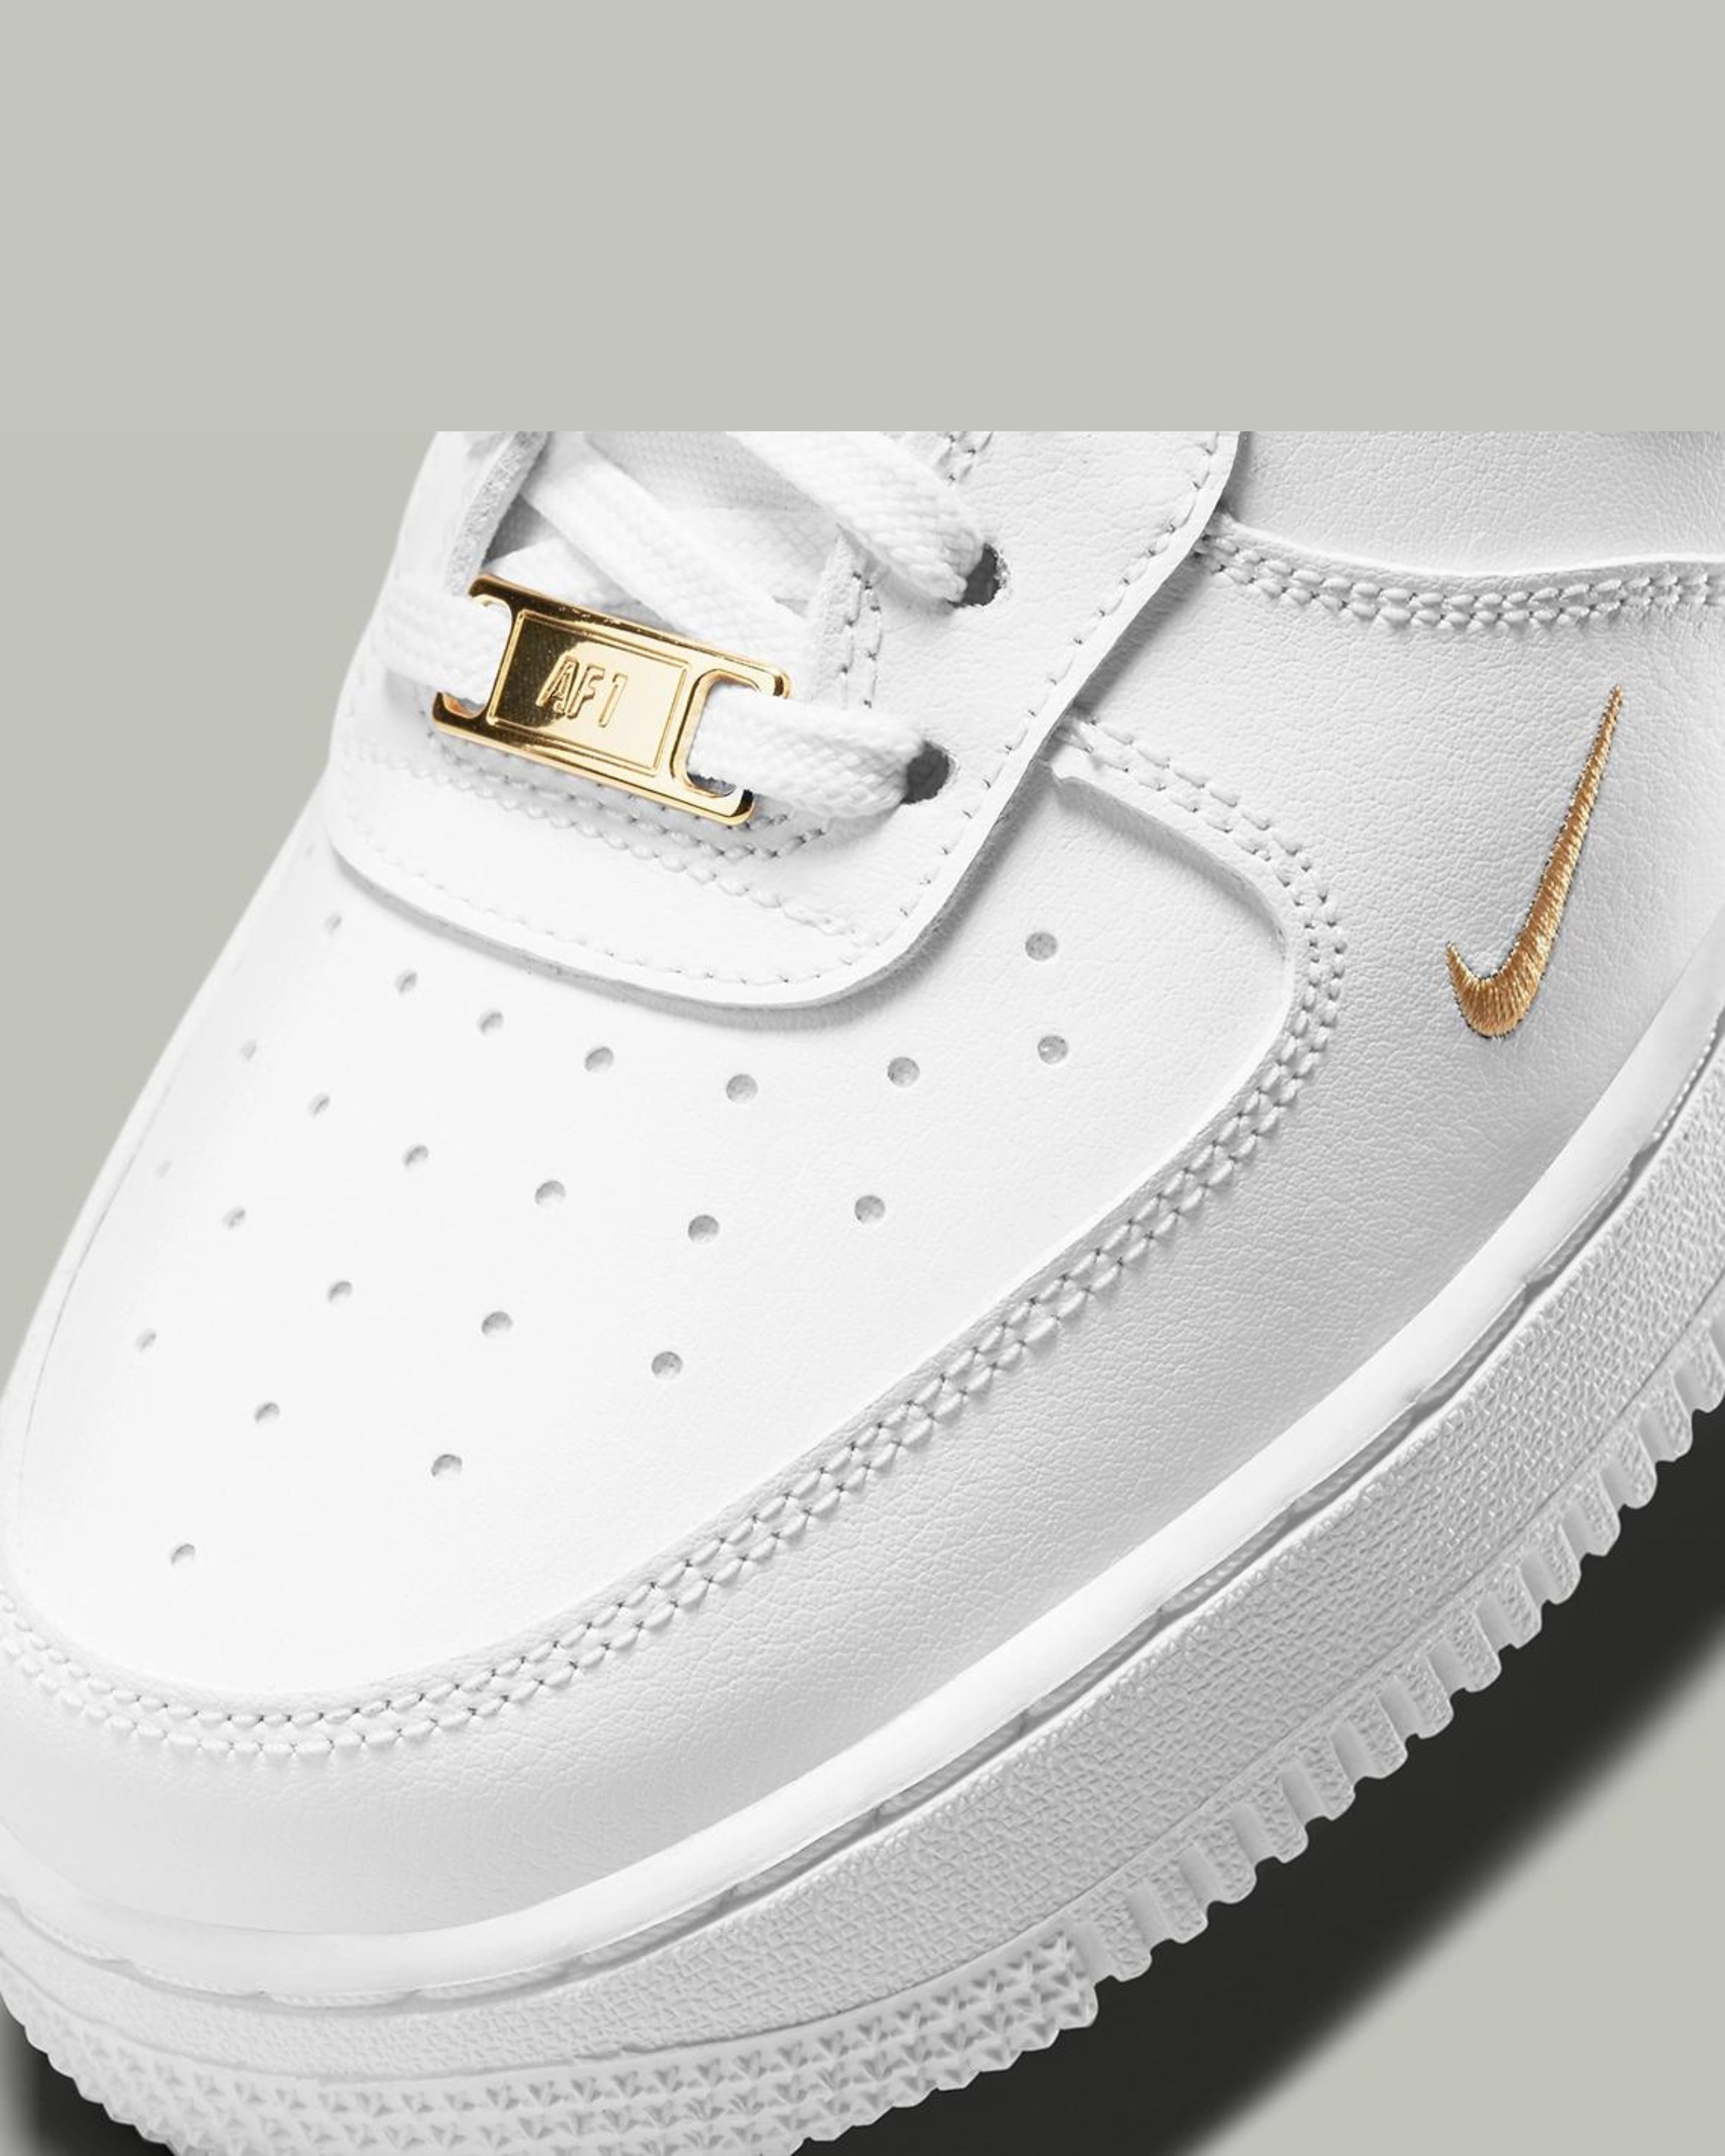 Nike Air Force 1 "golden sign"